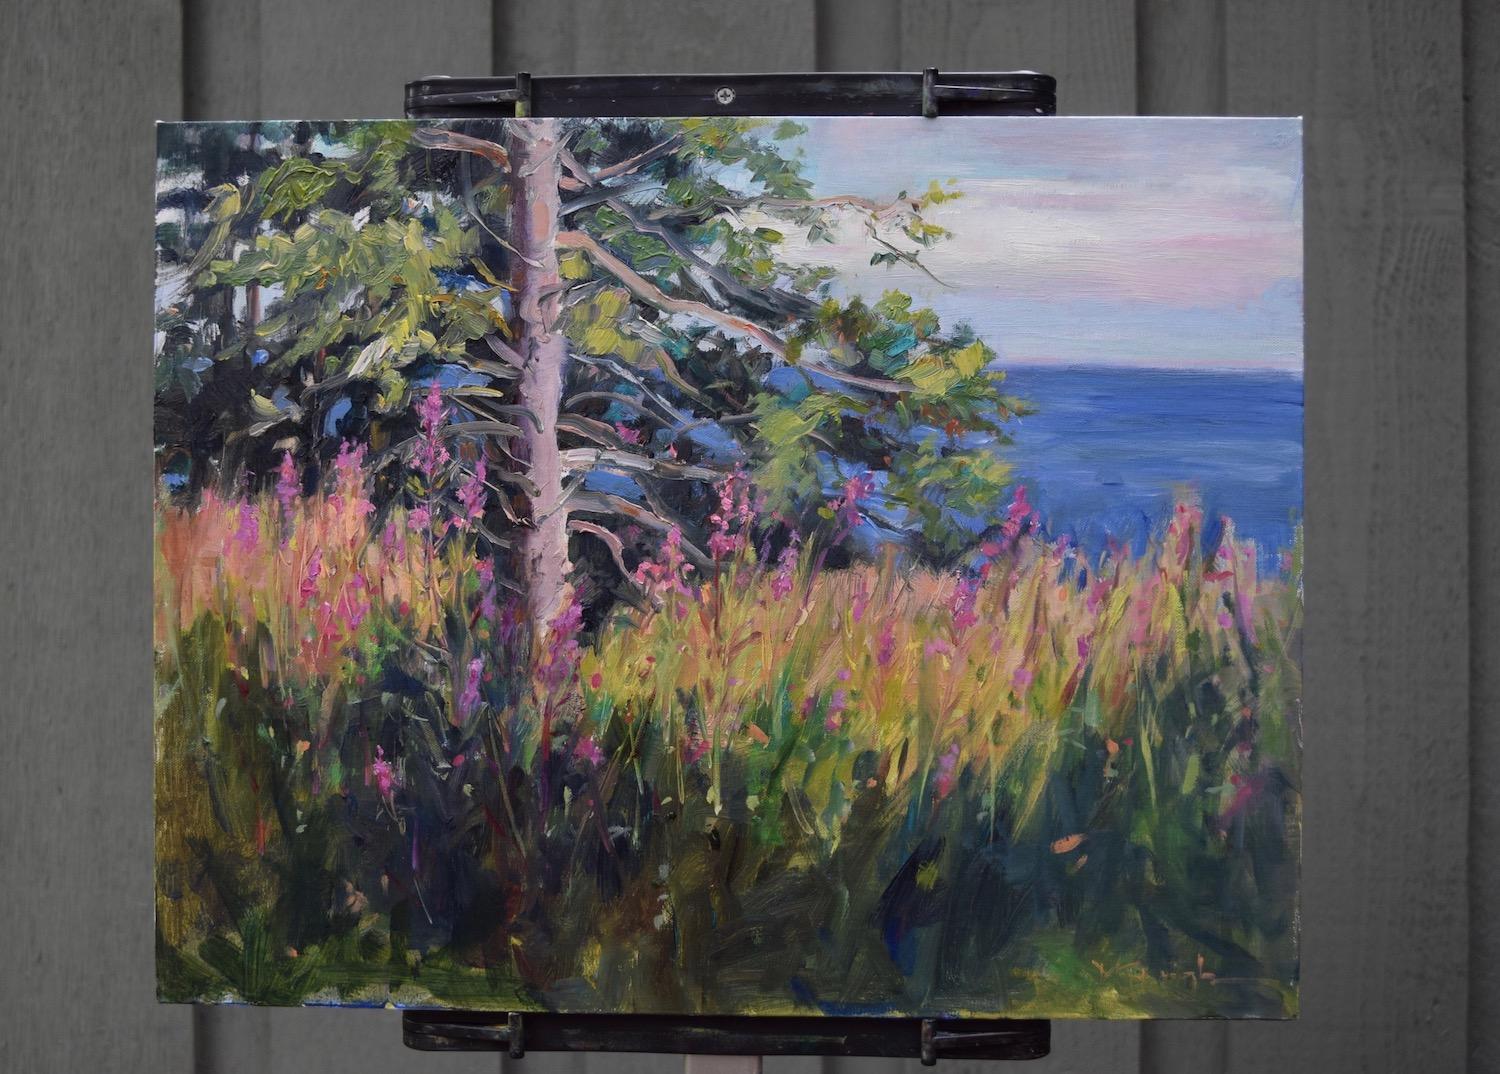 <p>Artist Comments<br />Mickey Cunningham painted this sunny landscape on location on the shore of Lake Superior. She says that the colorful flower in the scene, the purple loosestrife, is very pretty but also an invasive plant. Mickey applied rich